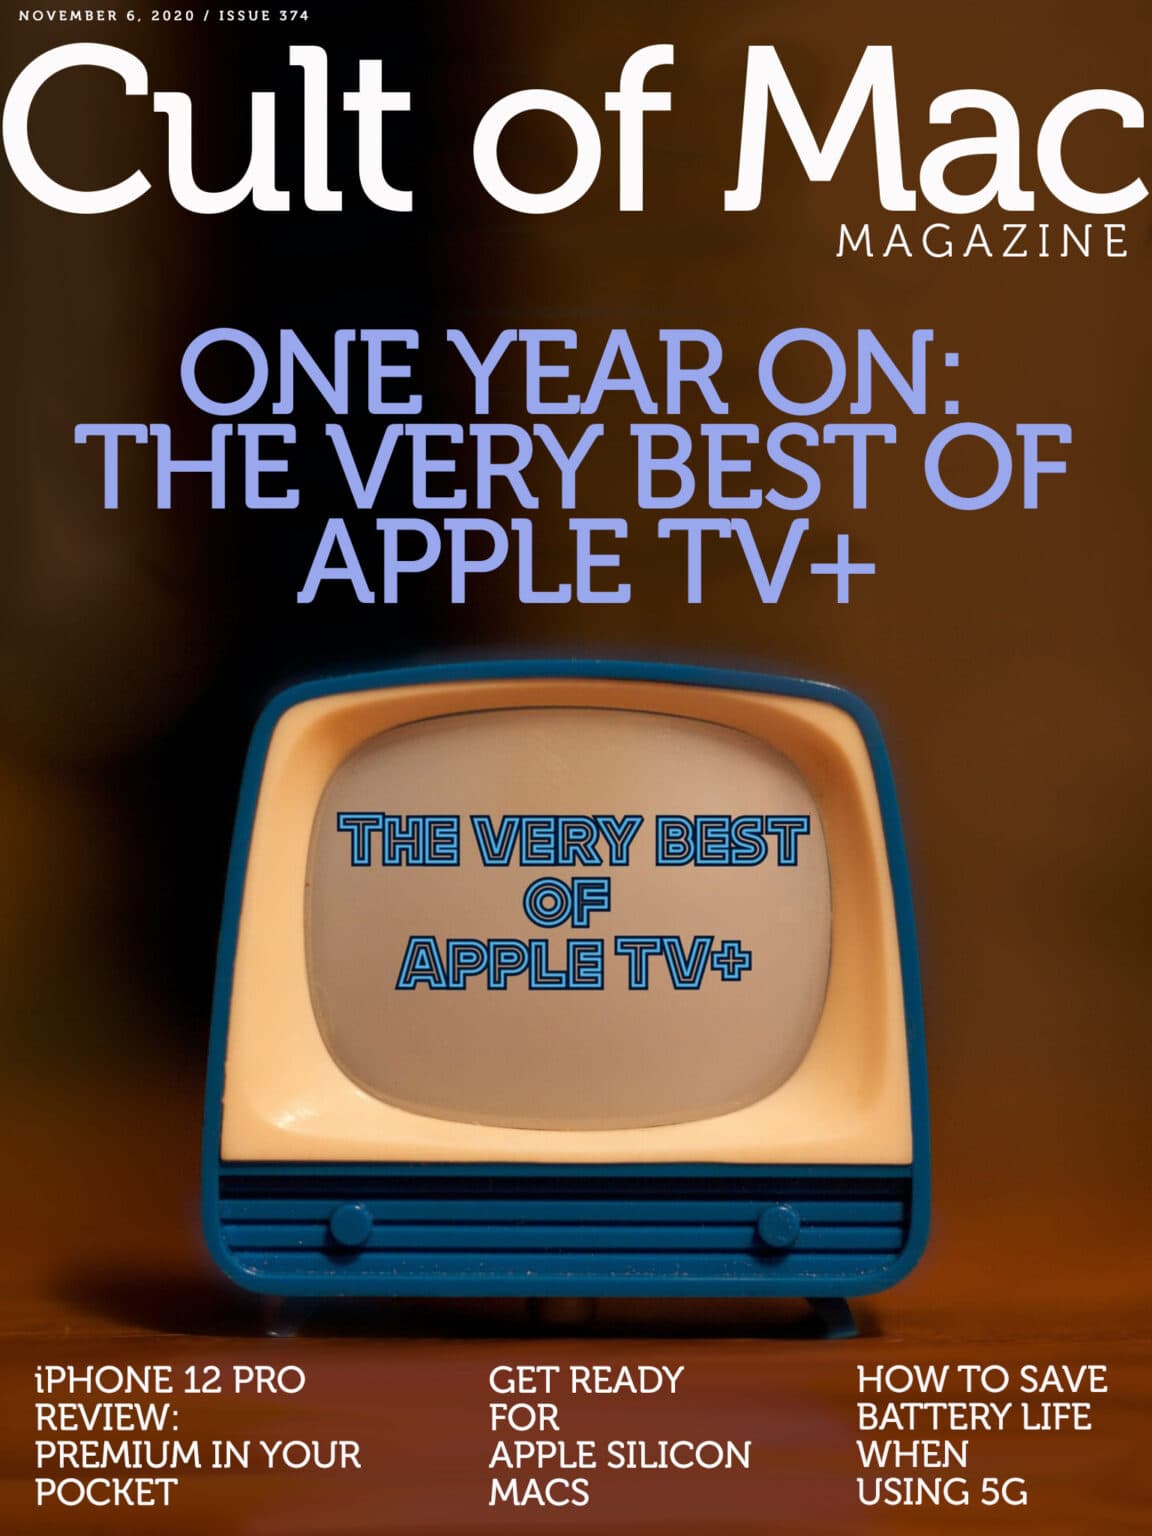 Best Apple TV+ shows: Prep your peepers for some stellar Apple TV+ shows.